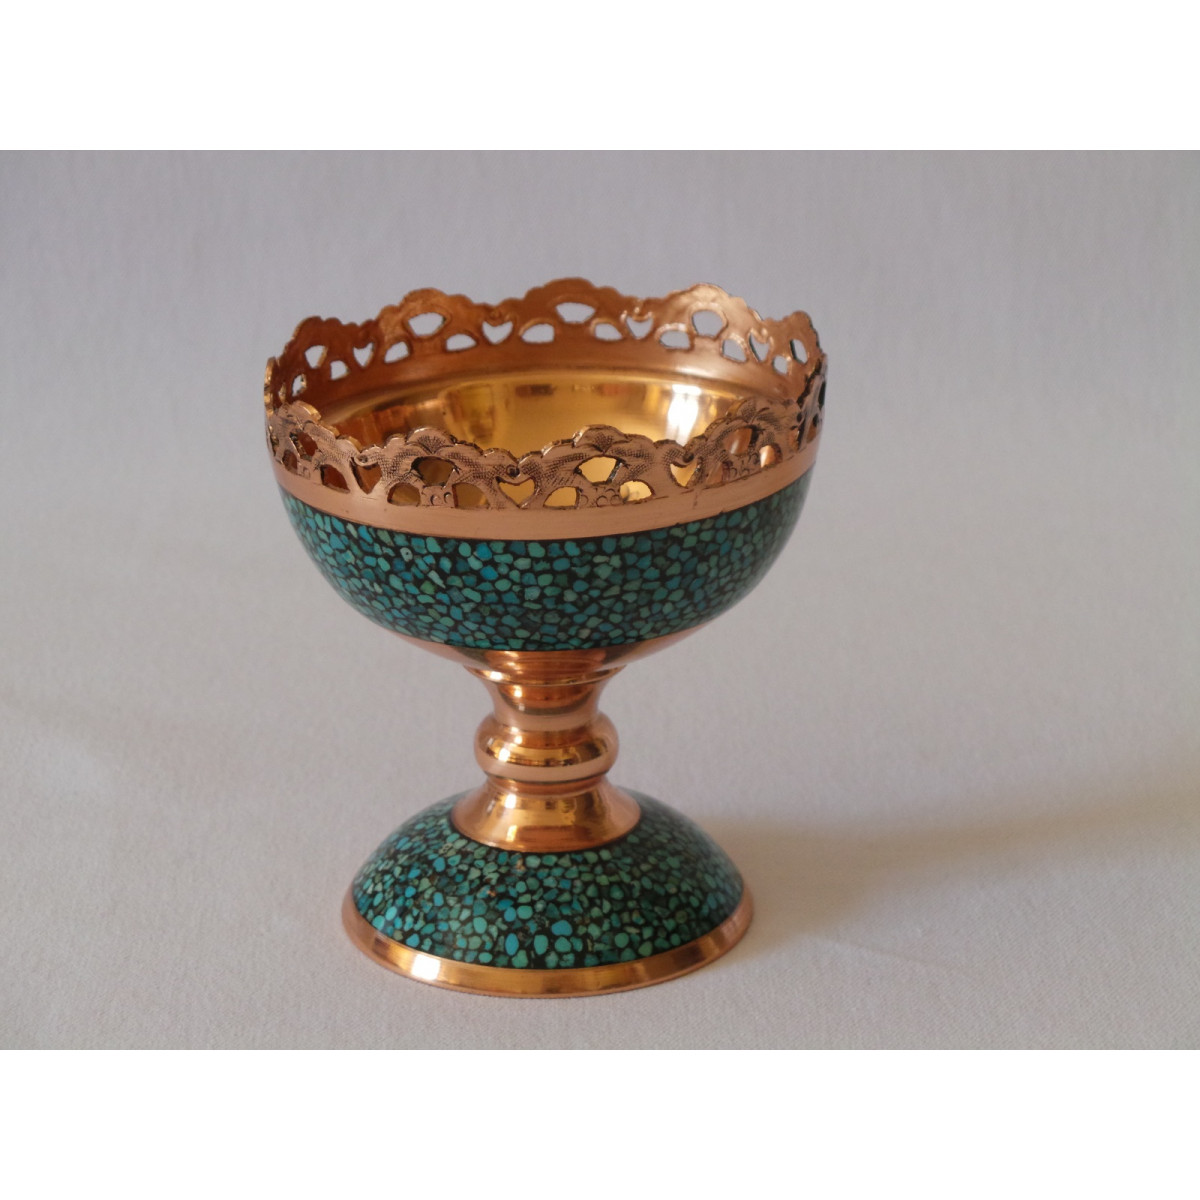 Turquoise Stone & Copper Pedestal Candy/Nuts Bowl Dish - HTI2012-Persian Handicrafts